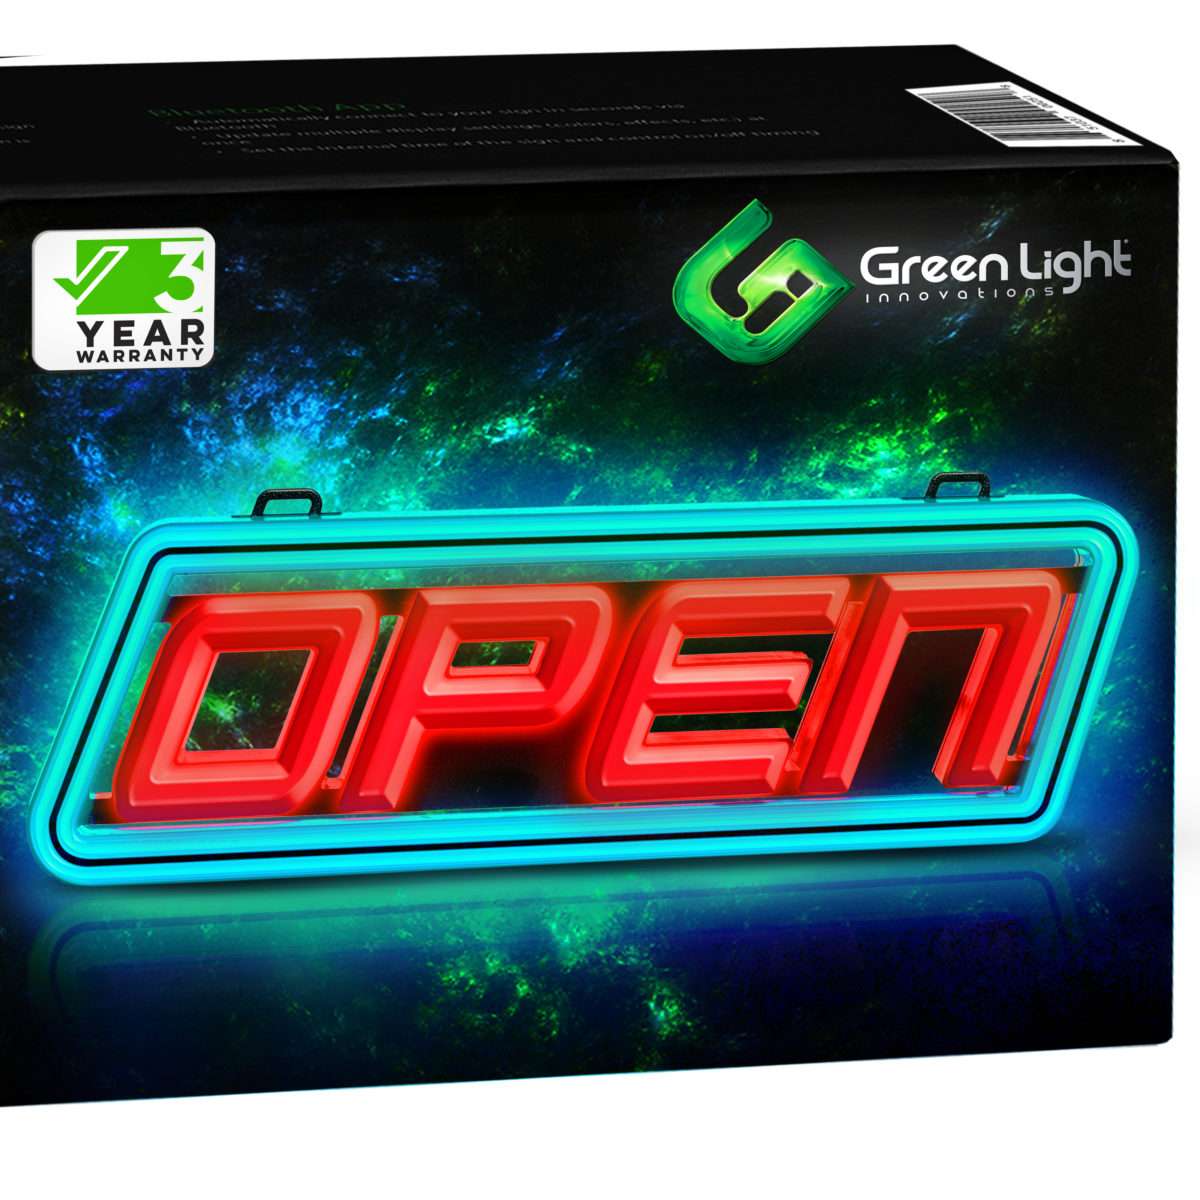 Super Bright LED Open Sign – Stand Out with Ultra Bright SMD LEDs in Vibrant Red and Blue – Get Your Business Seen Day or Night with This 15 x 5 Inch That Fits Any Window – Includes Fixings